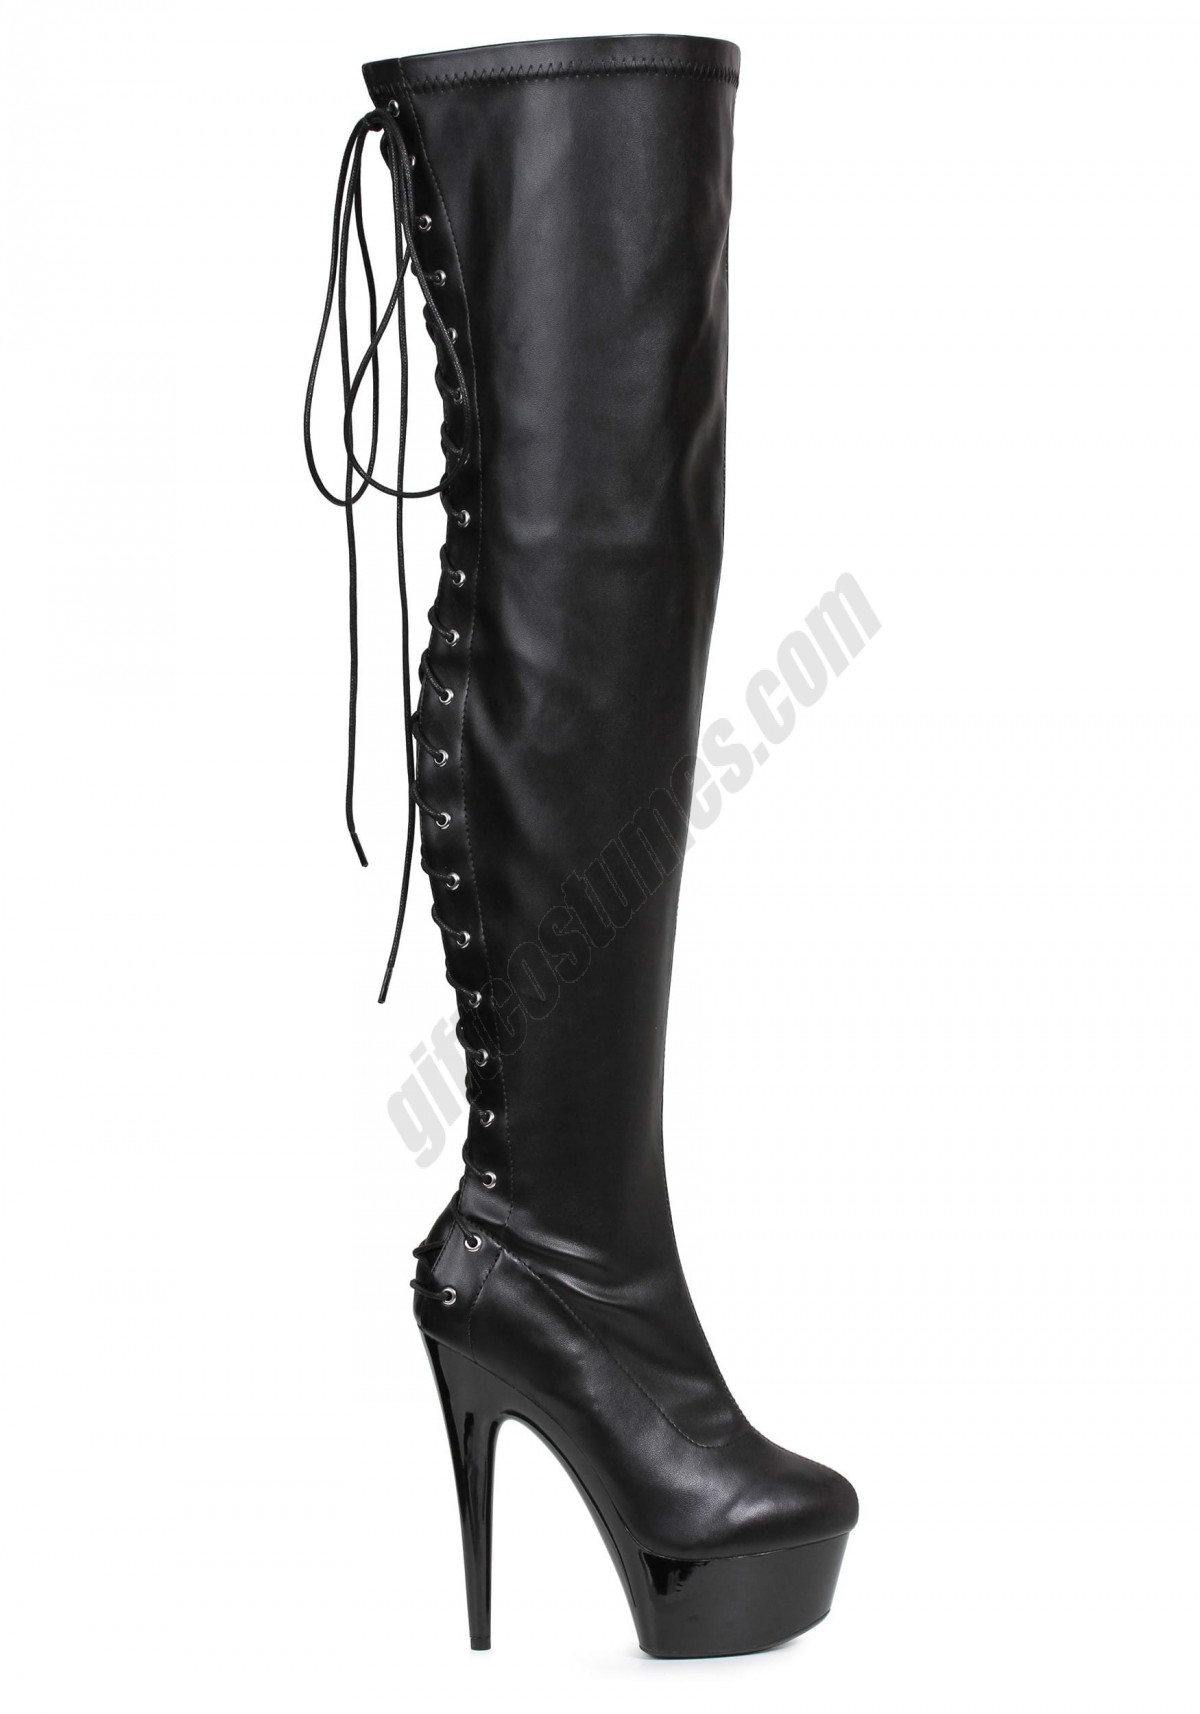 Black Lace Thigh High Boots for Women Promotions - -0